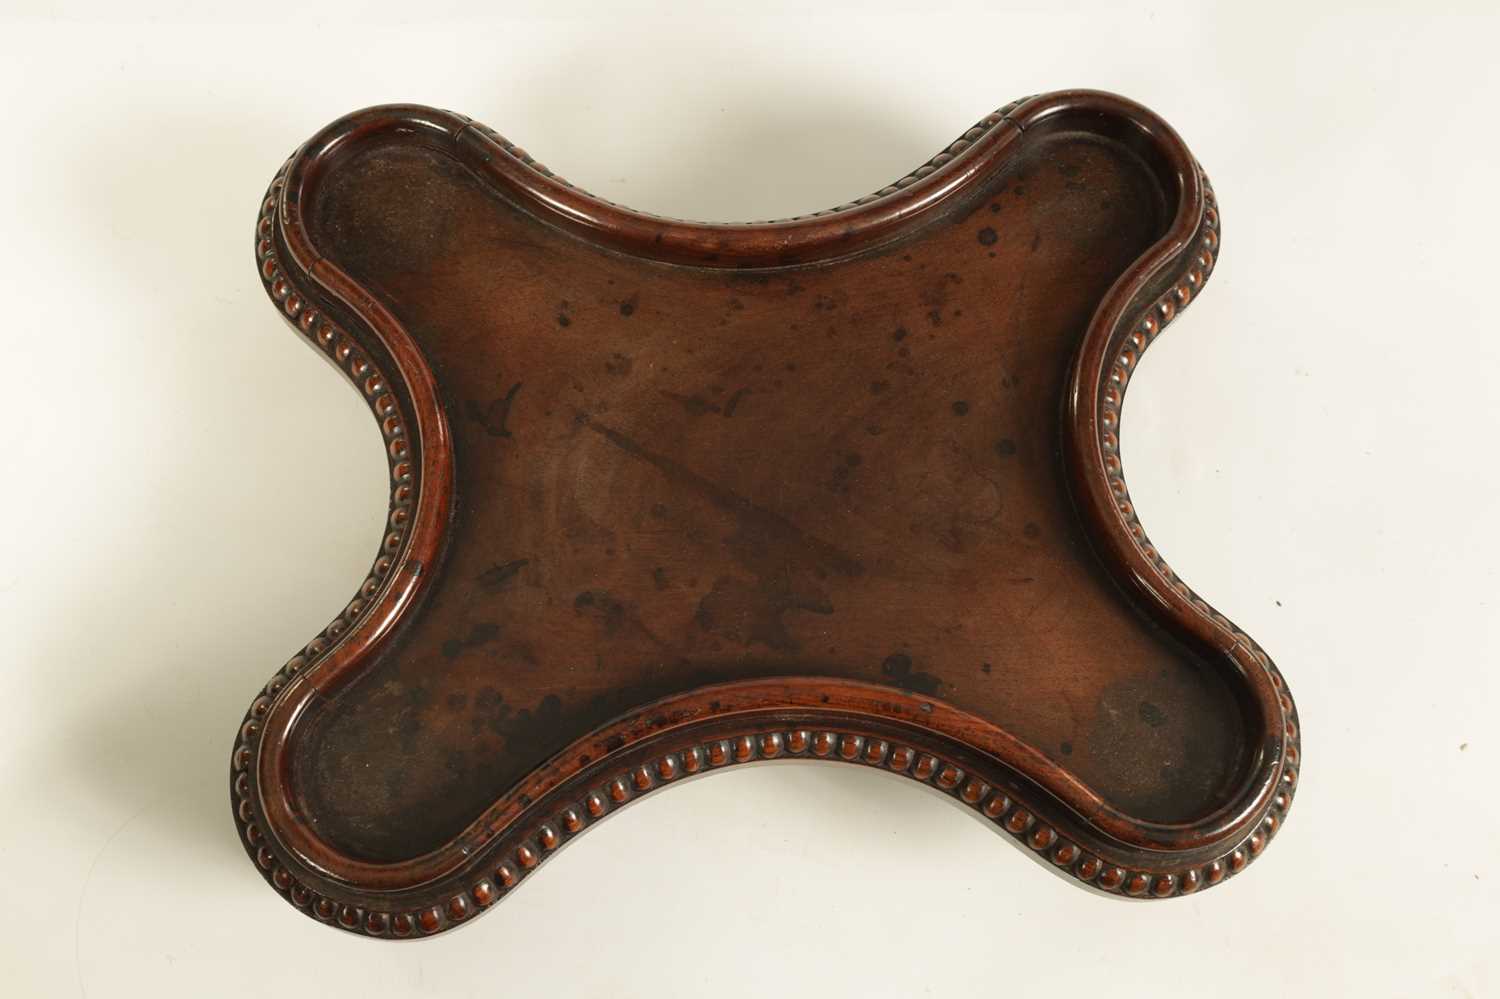 A LATE GEORGIAN MAHOGANY TABLE URN STAND IN THE MANNER OF GILLOWS - Image 3 of 4